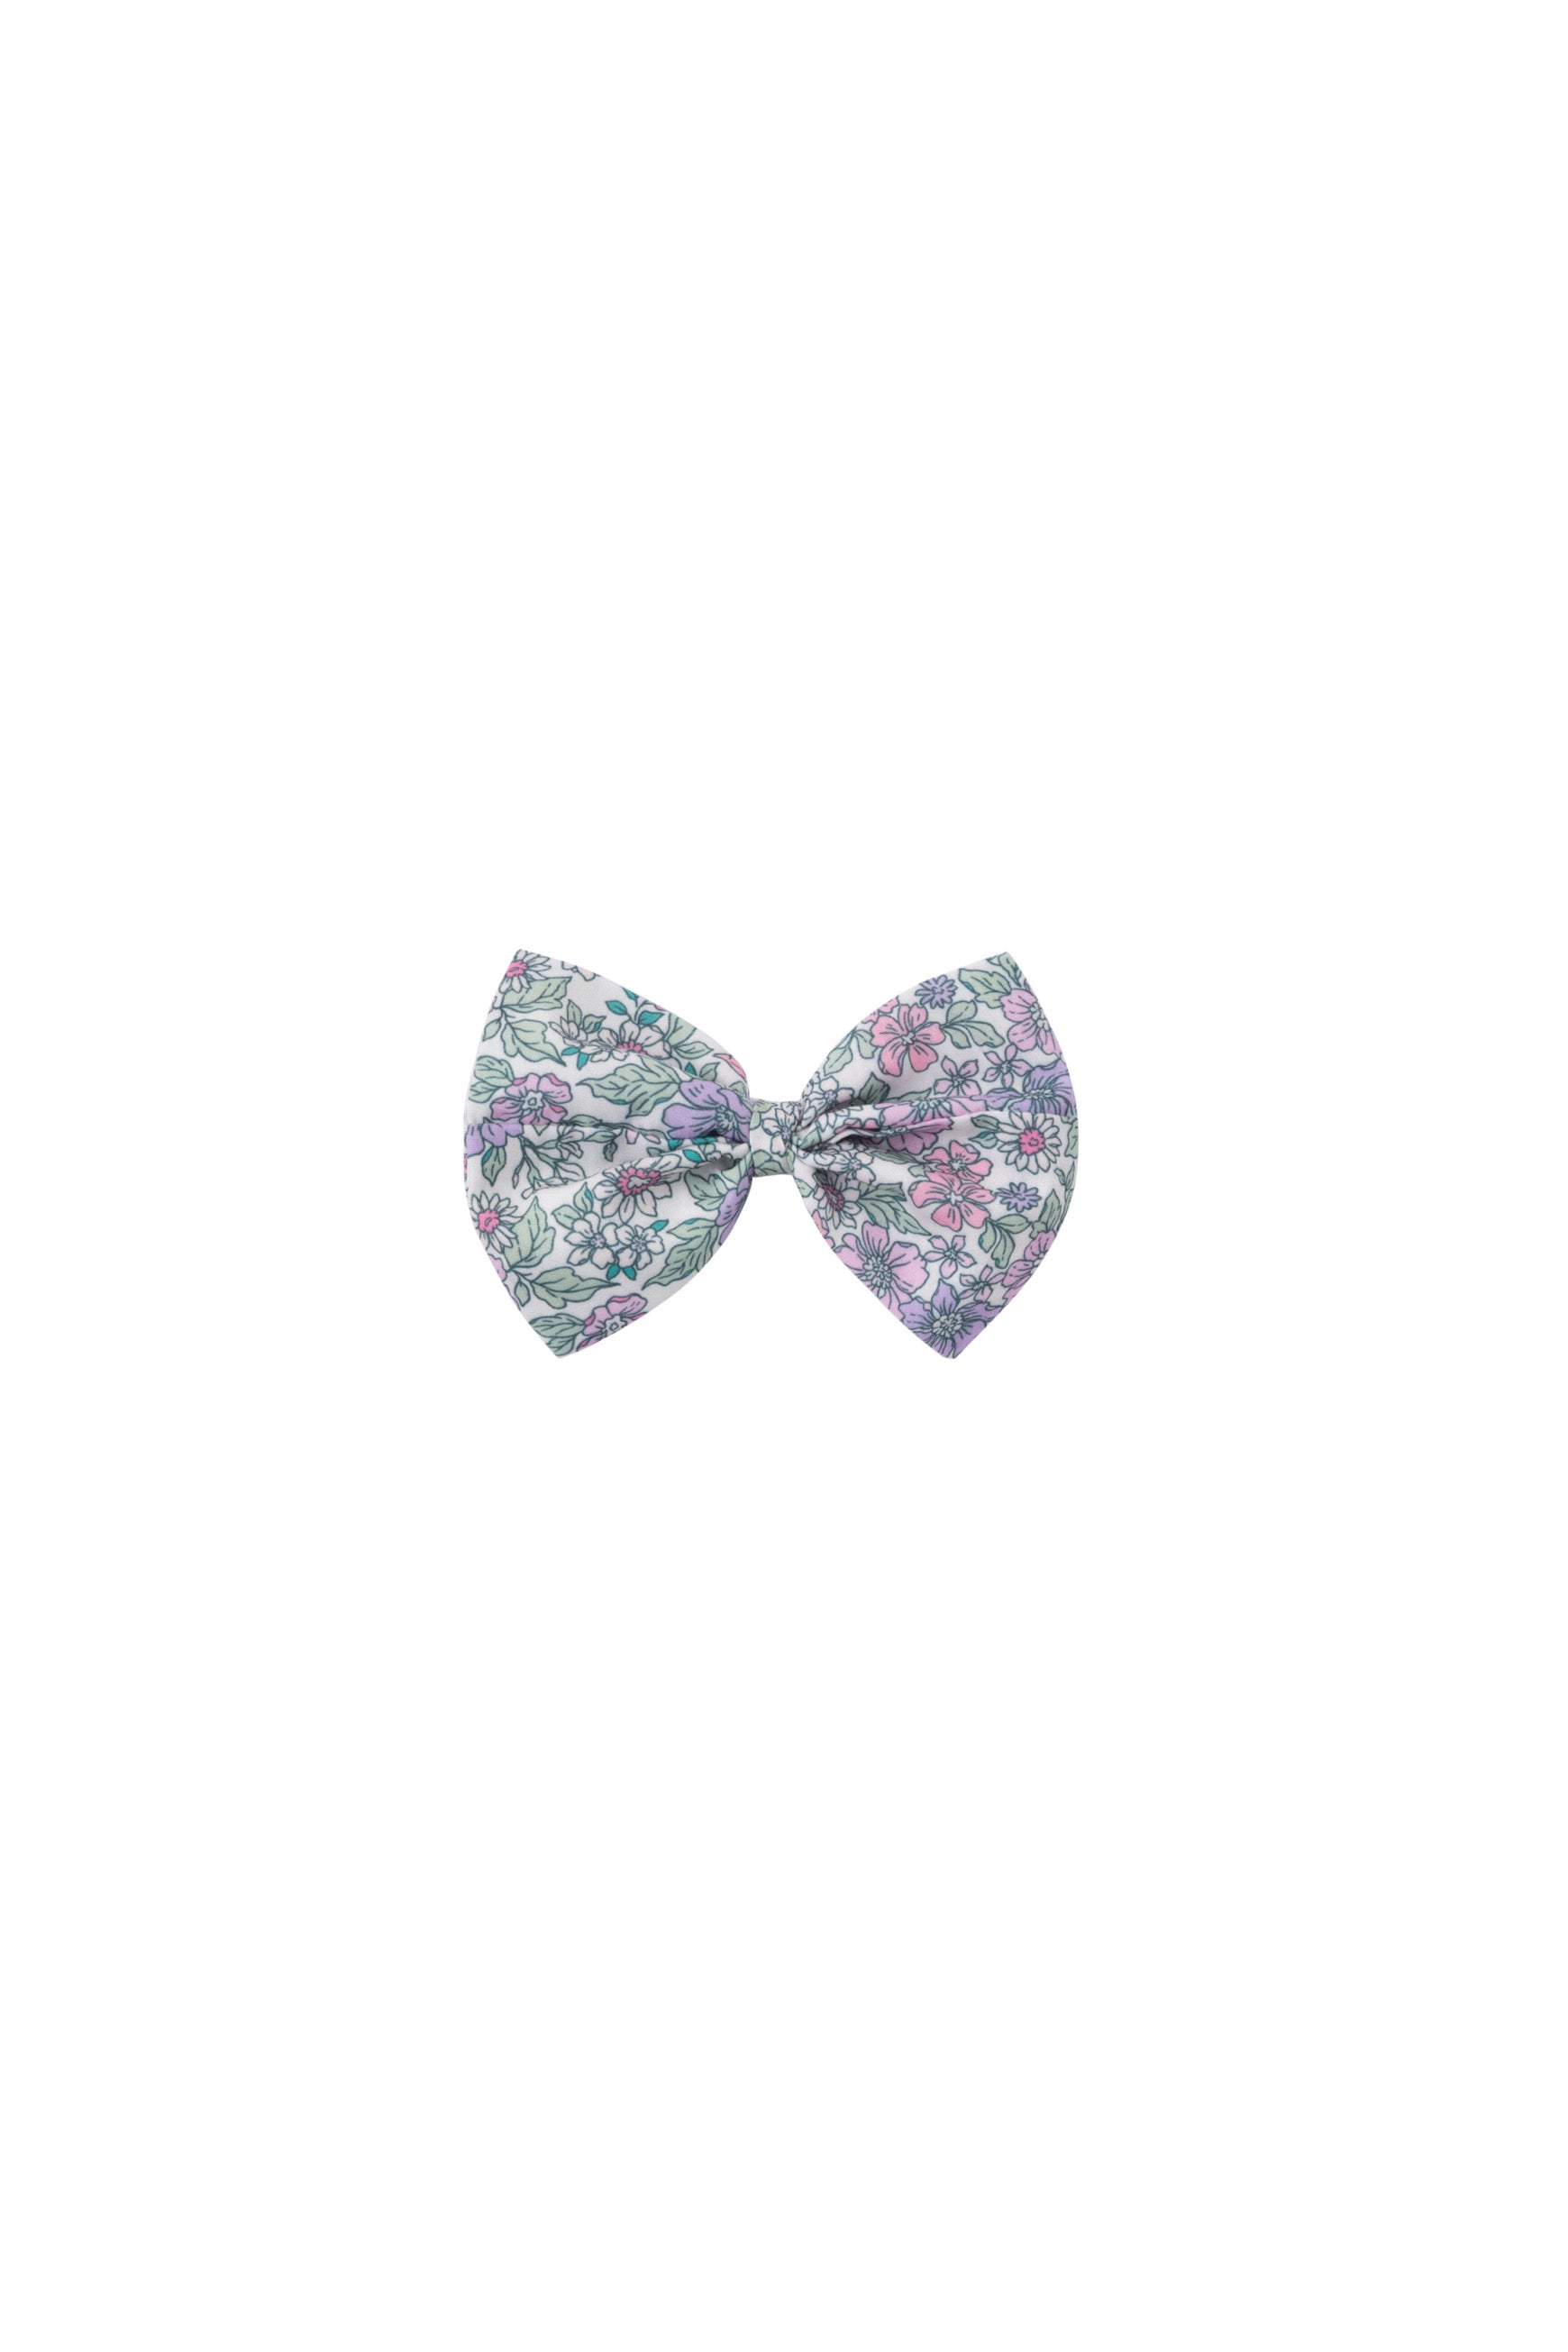 Posy blossom hair accessories